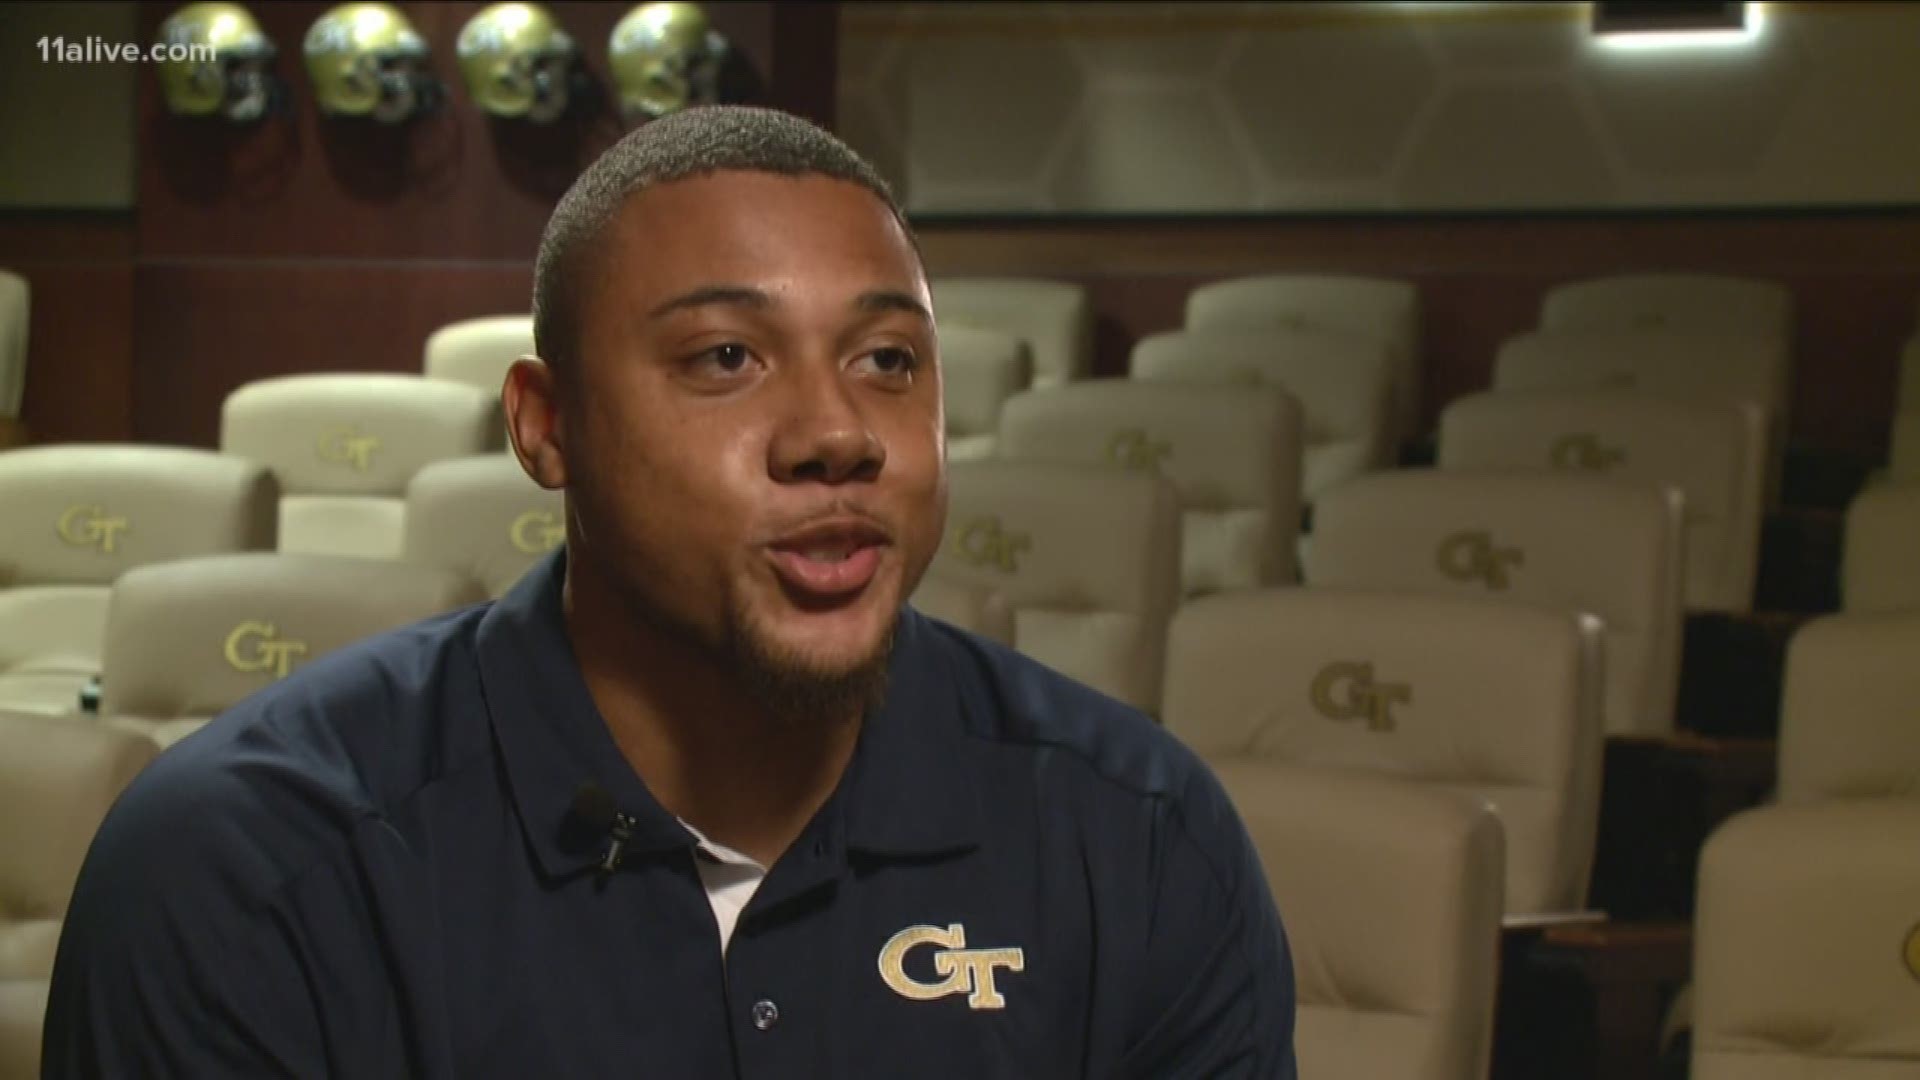 This time of year, we reflect on what we're thankful for. Former Georgia Tech Yellow Jacket A.J. Gray is thankful for football, because it was his life. But before his senior season, the game was suddenly ripped away from him.